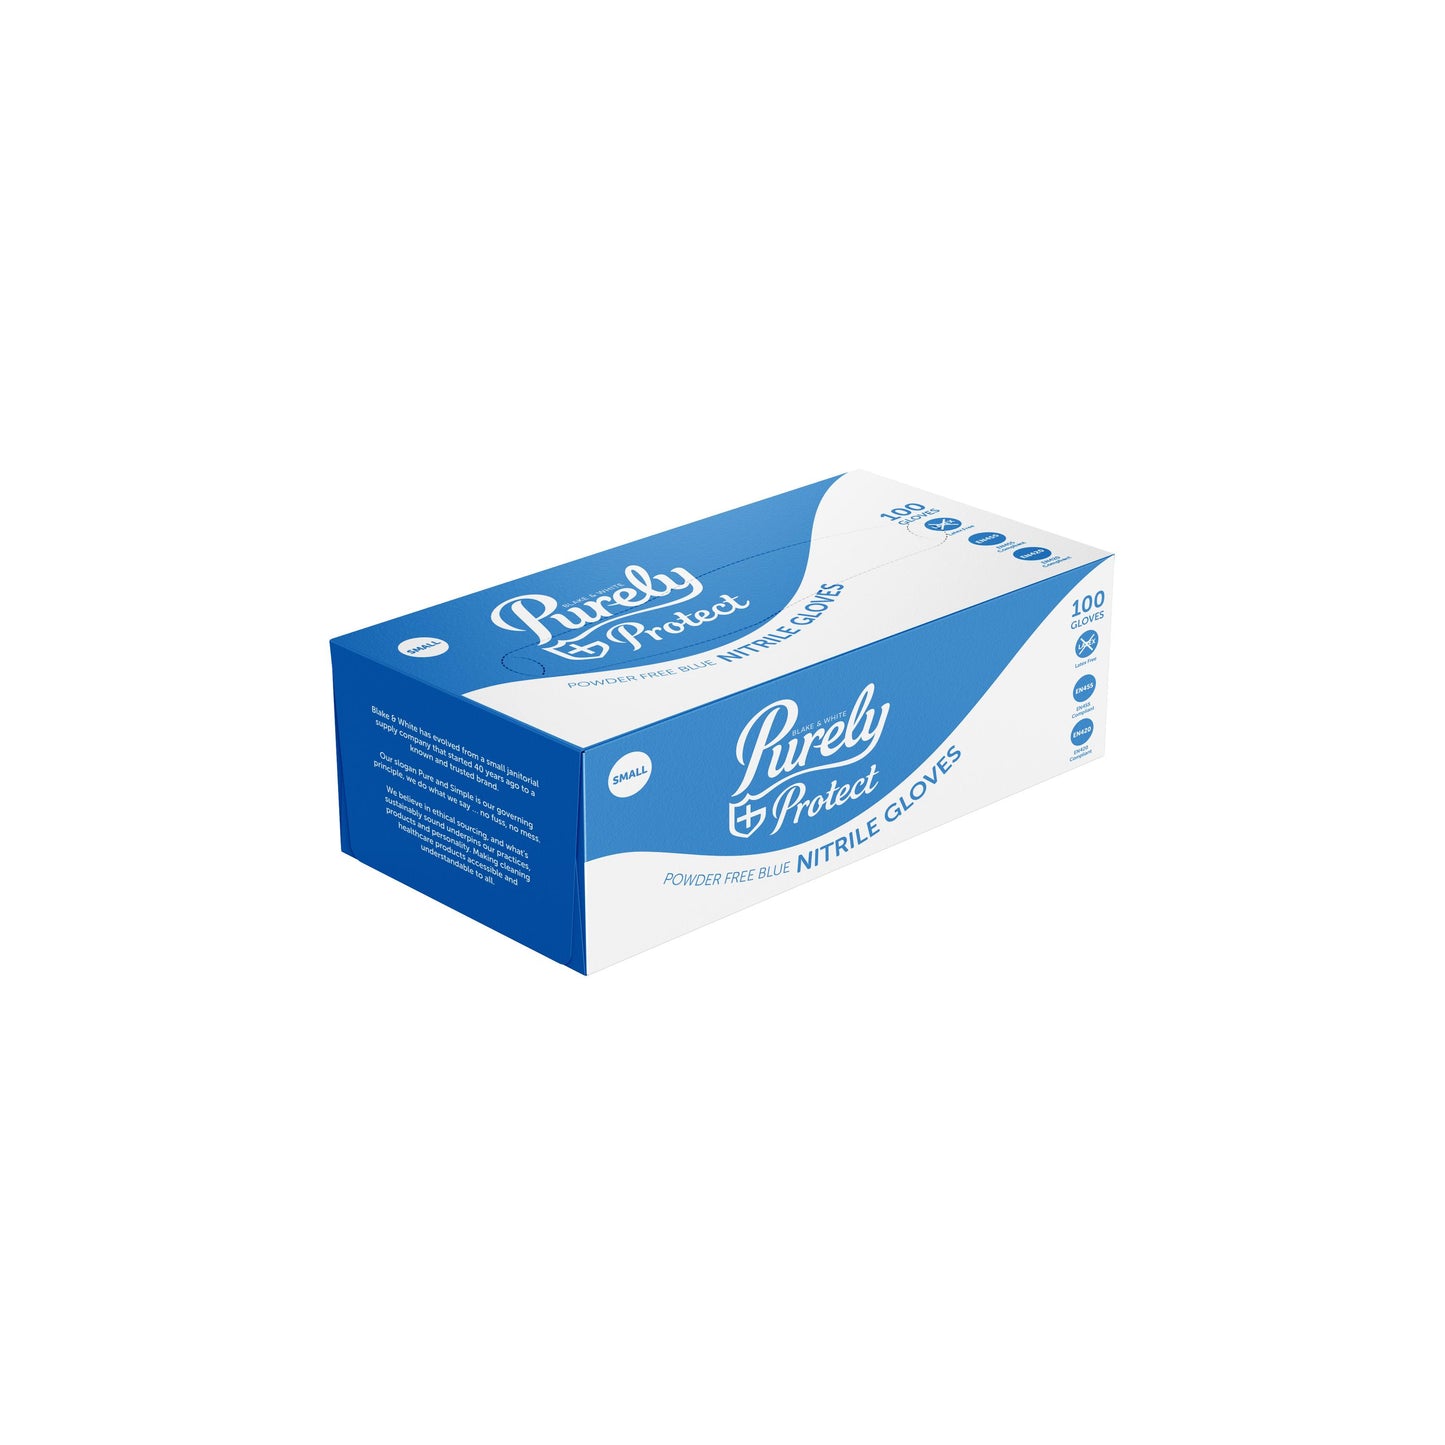 Purely Protect Nitrile Gloves Blue Small Box of 100